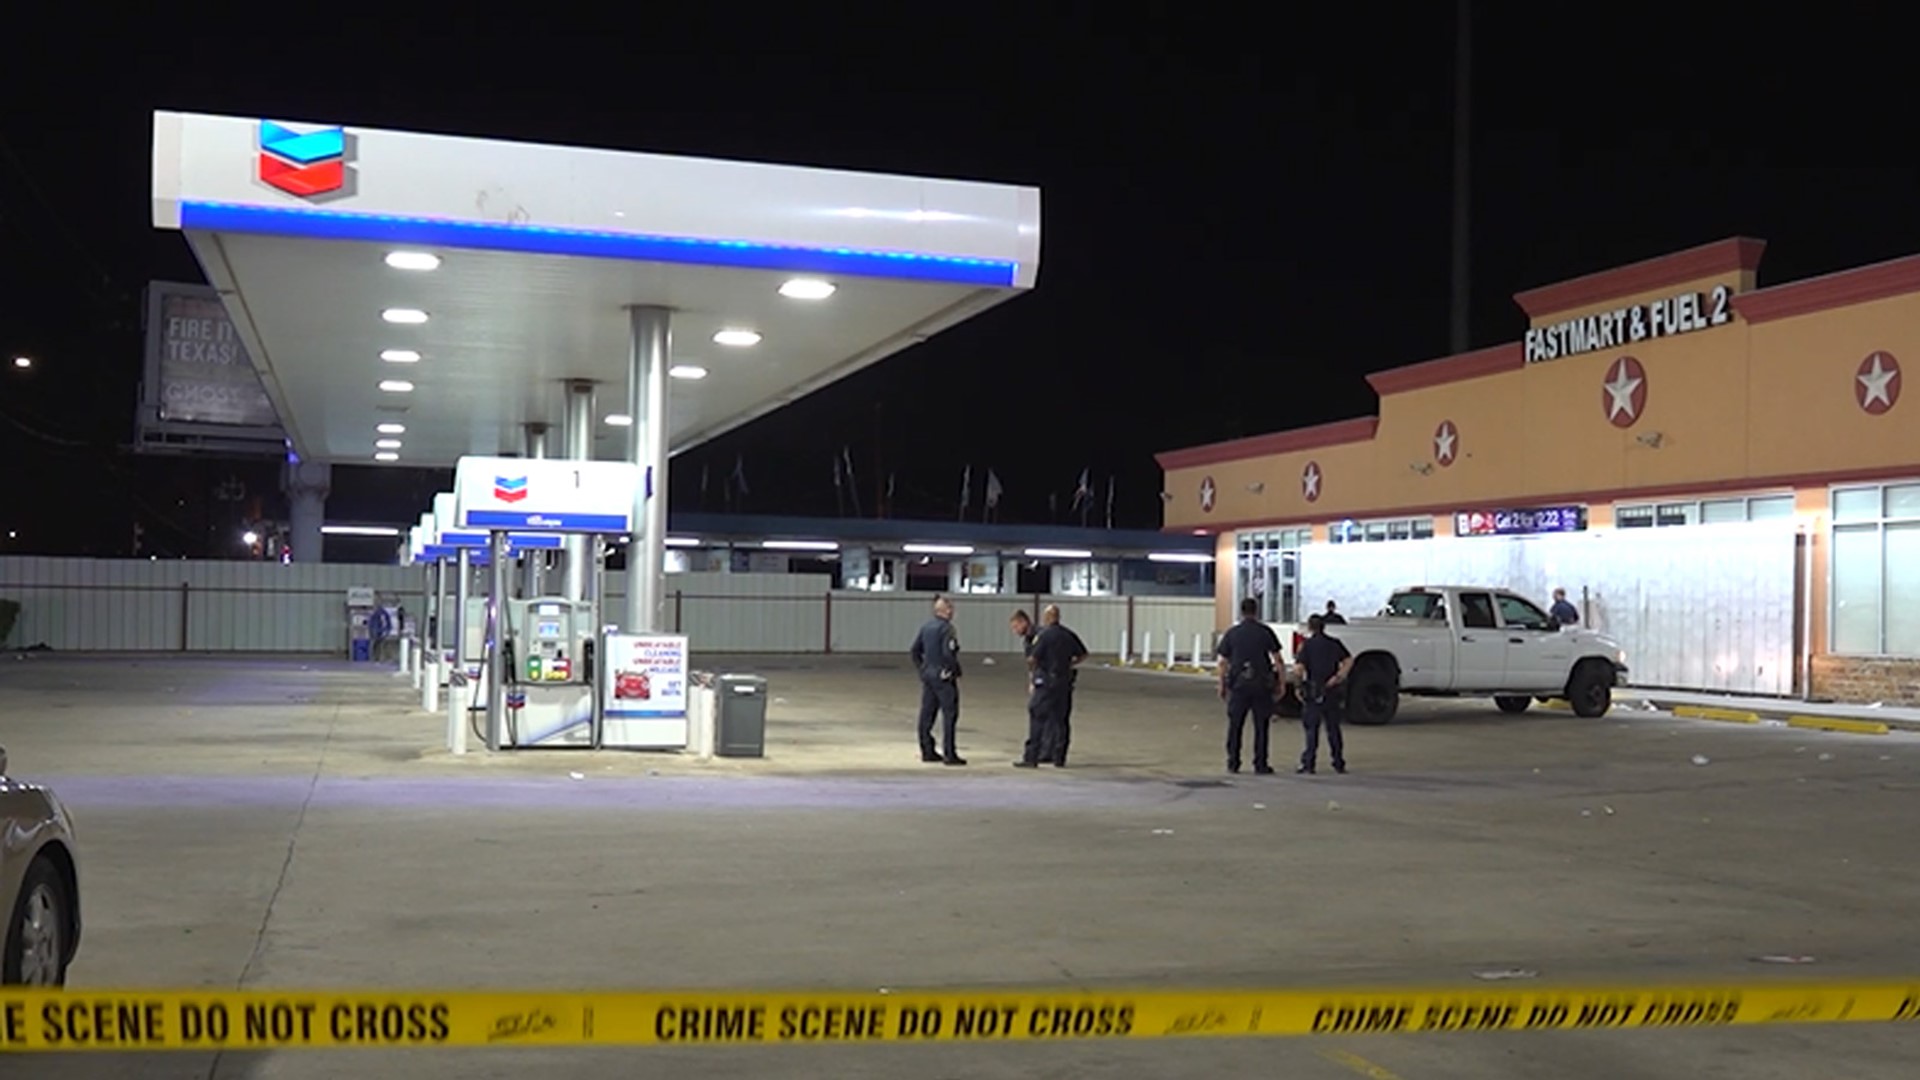 The shooting was reported at about 11:40 p.m. Sunday in the 9700 block of Homestead at the ‘Fastmart & Fuel’ Chevron station.